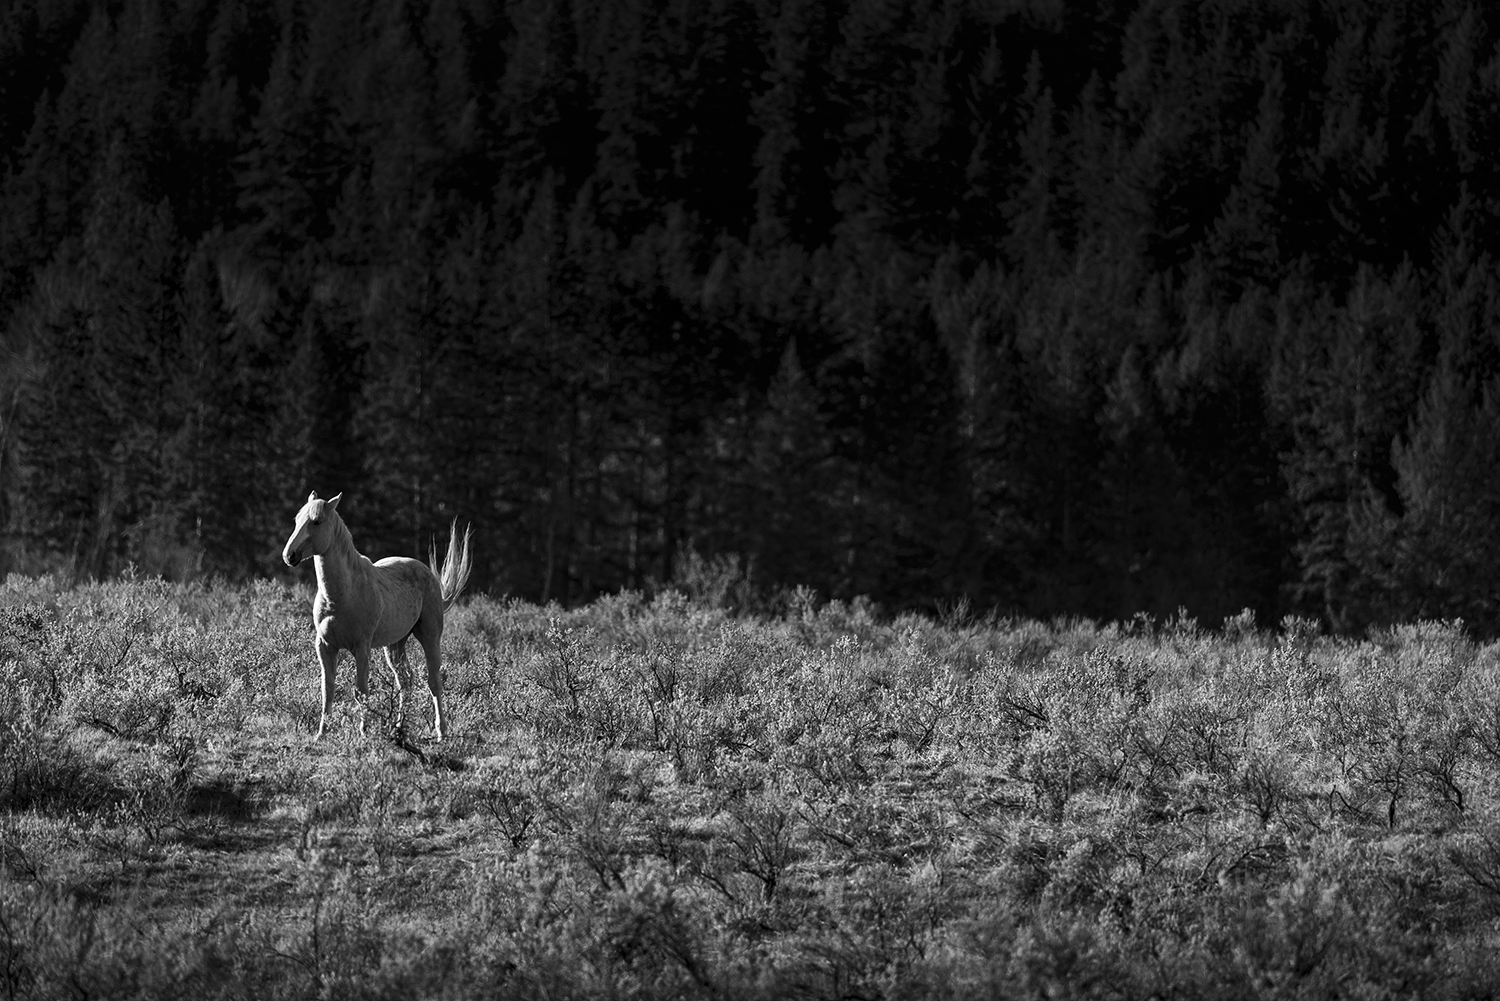 Kamloops grayscale photo of a horse galloping with tall grass